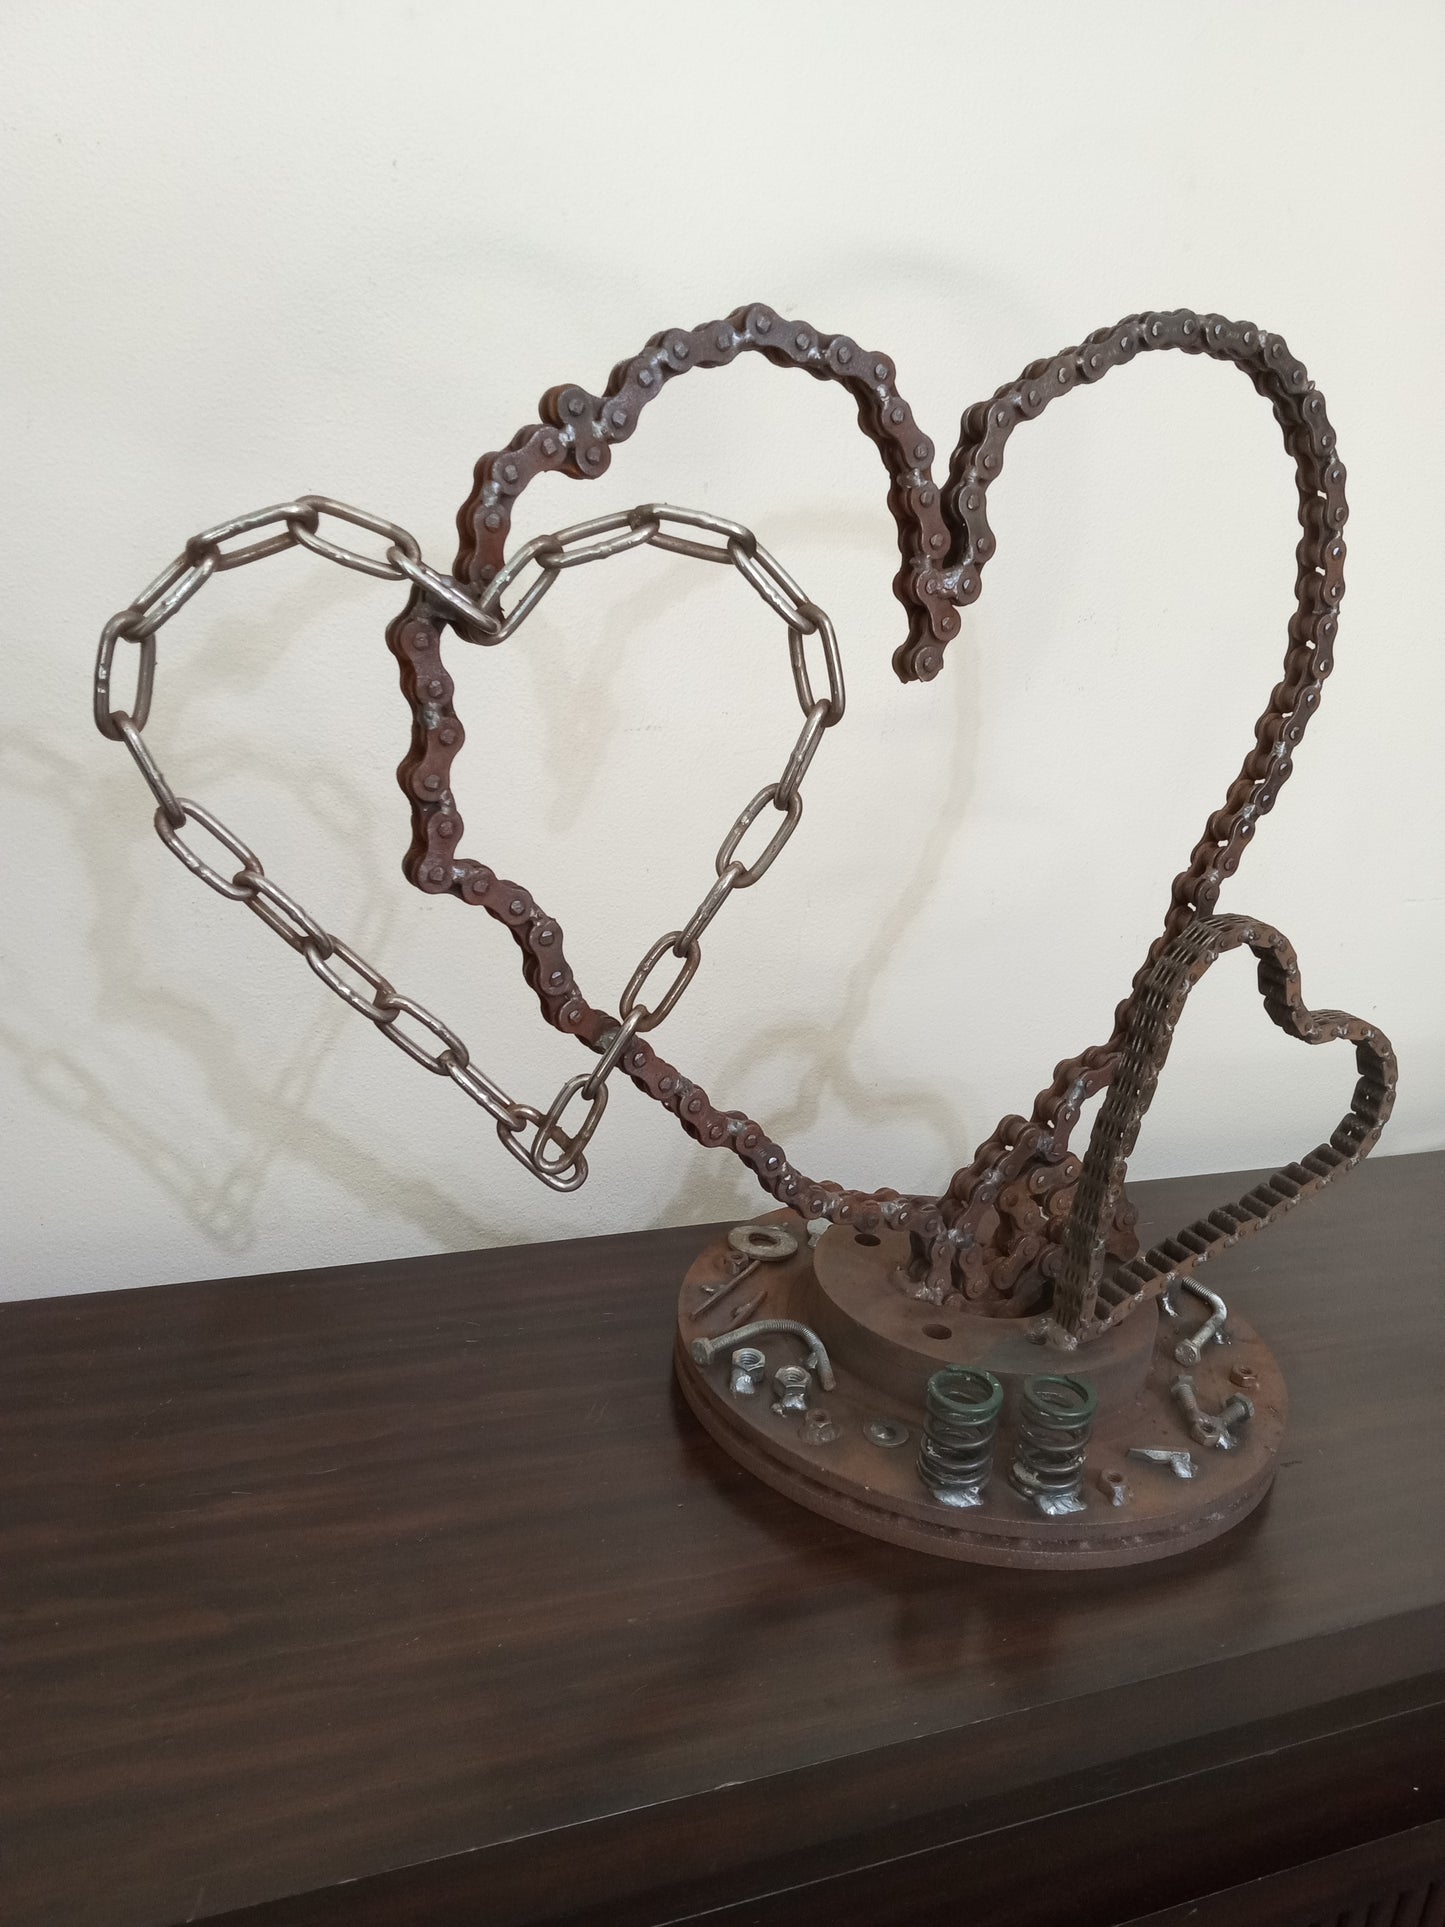 Metal Heart Sculpture of Motorcycle Chains, Rustic Up cycled Welded Metal Art